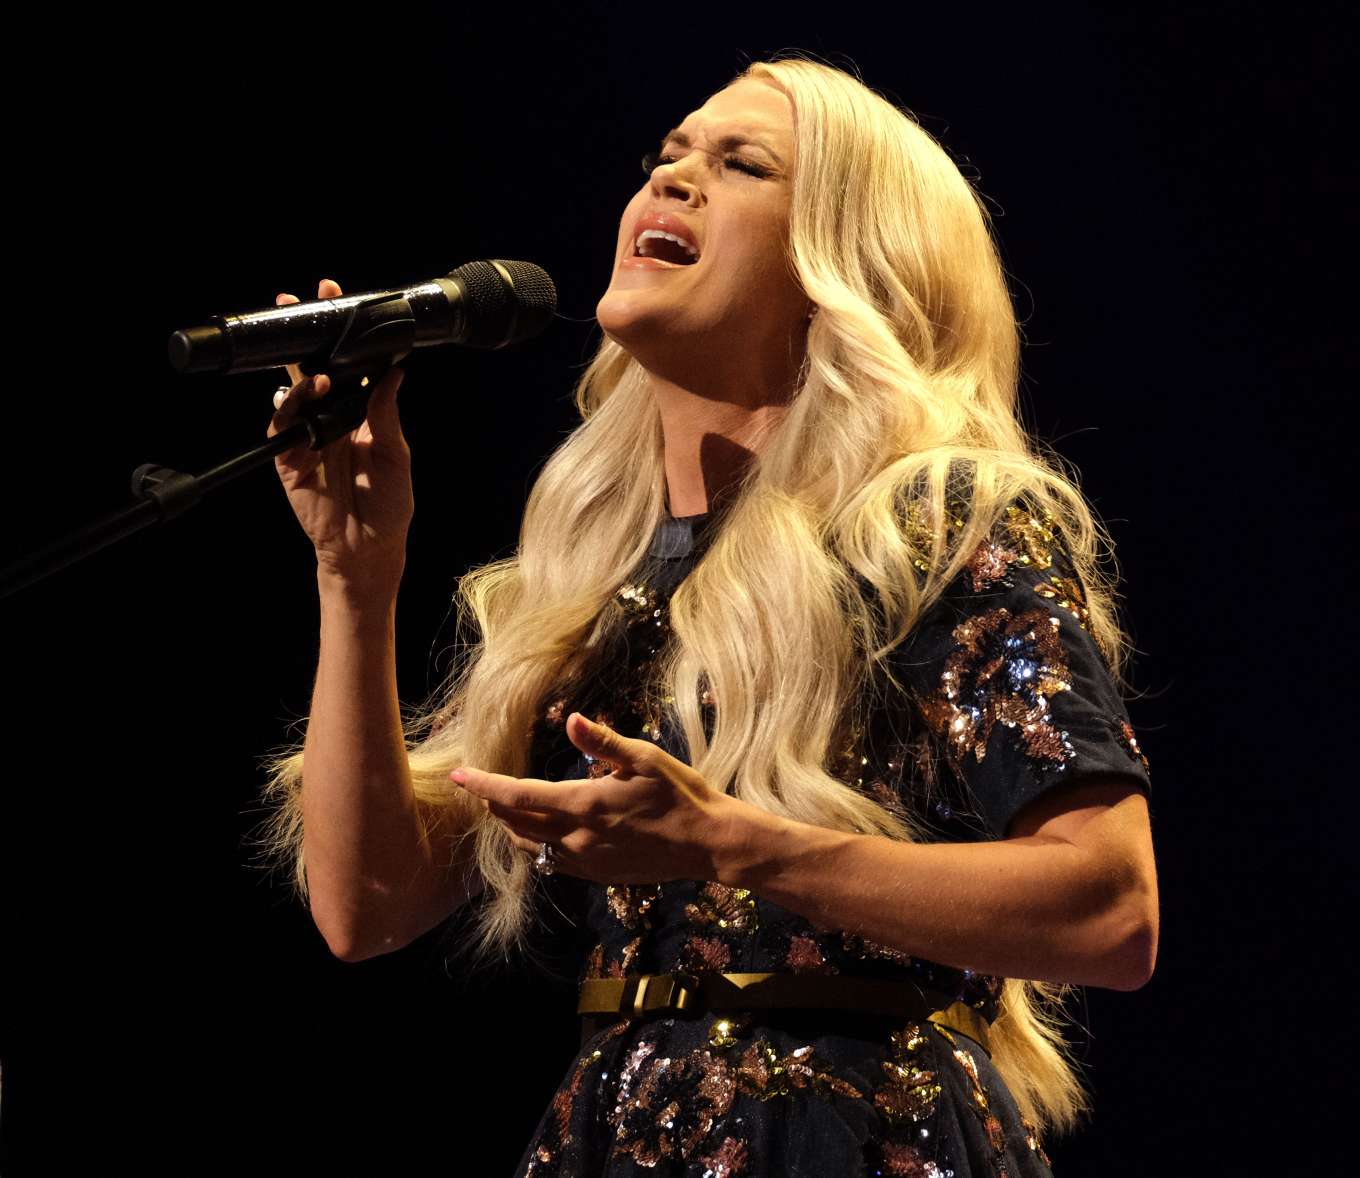 Carrie Underwood Performing at the Grand Ole Opry27 GotCeleb